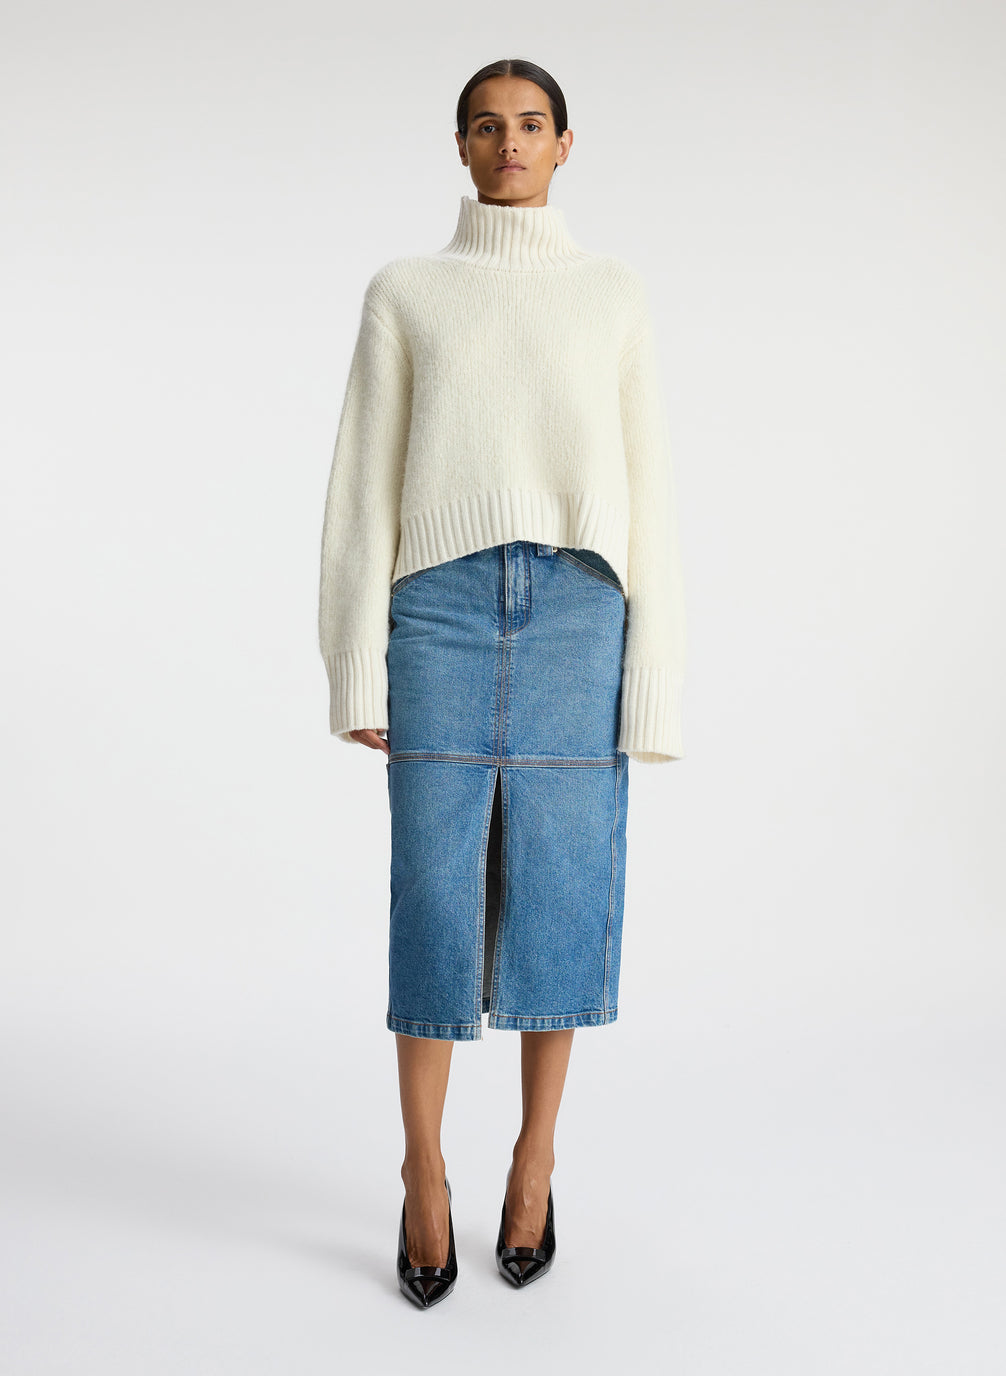 front view of woman wearing white turtleneck sweater and denim midi skirt